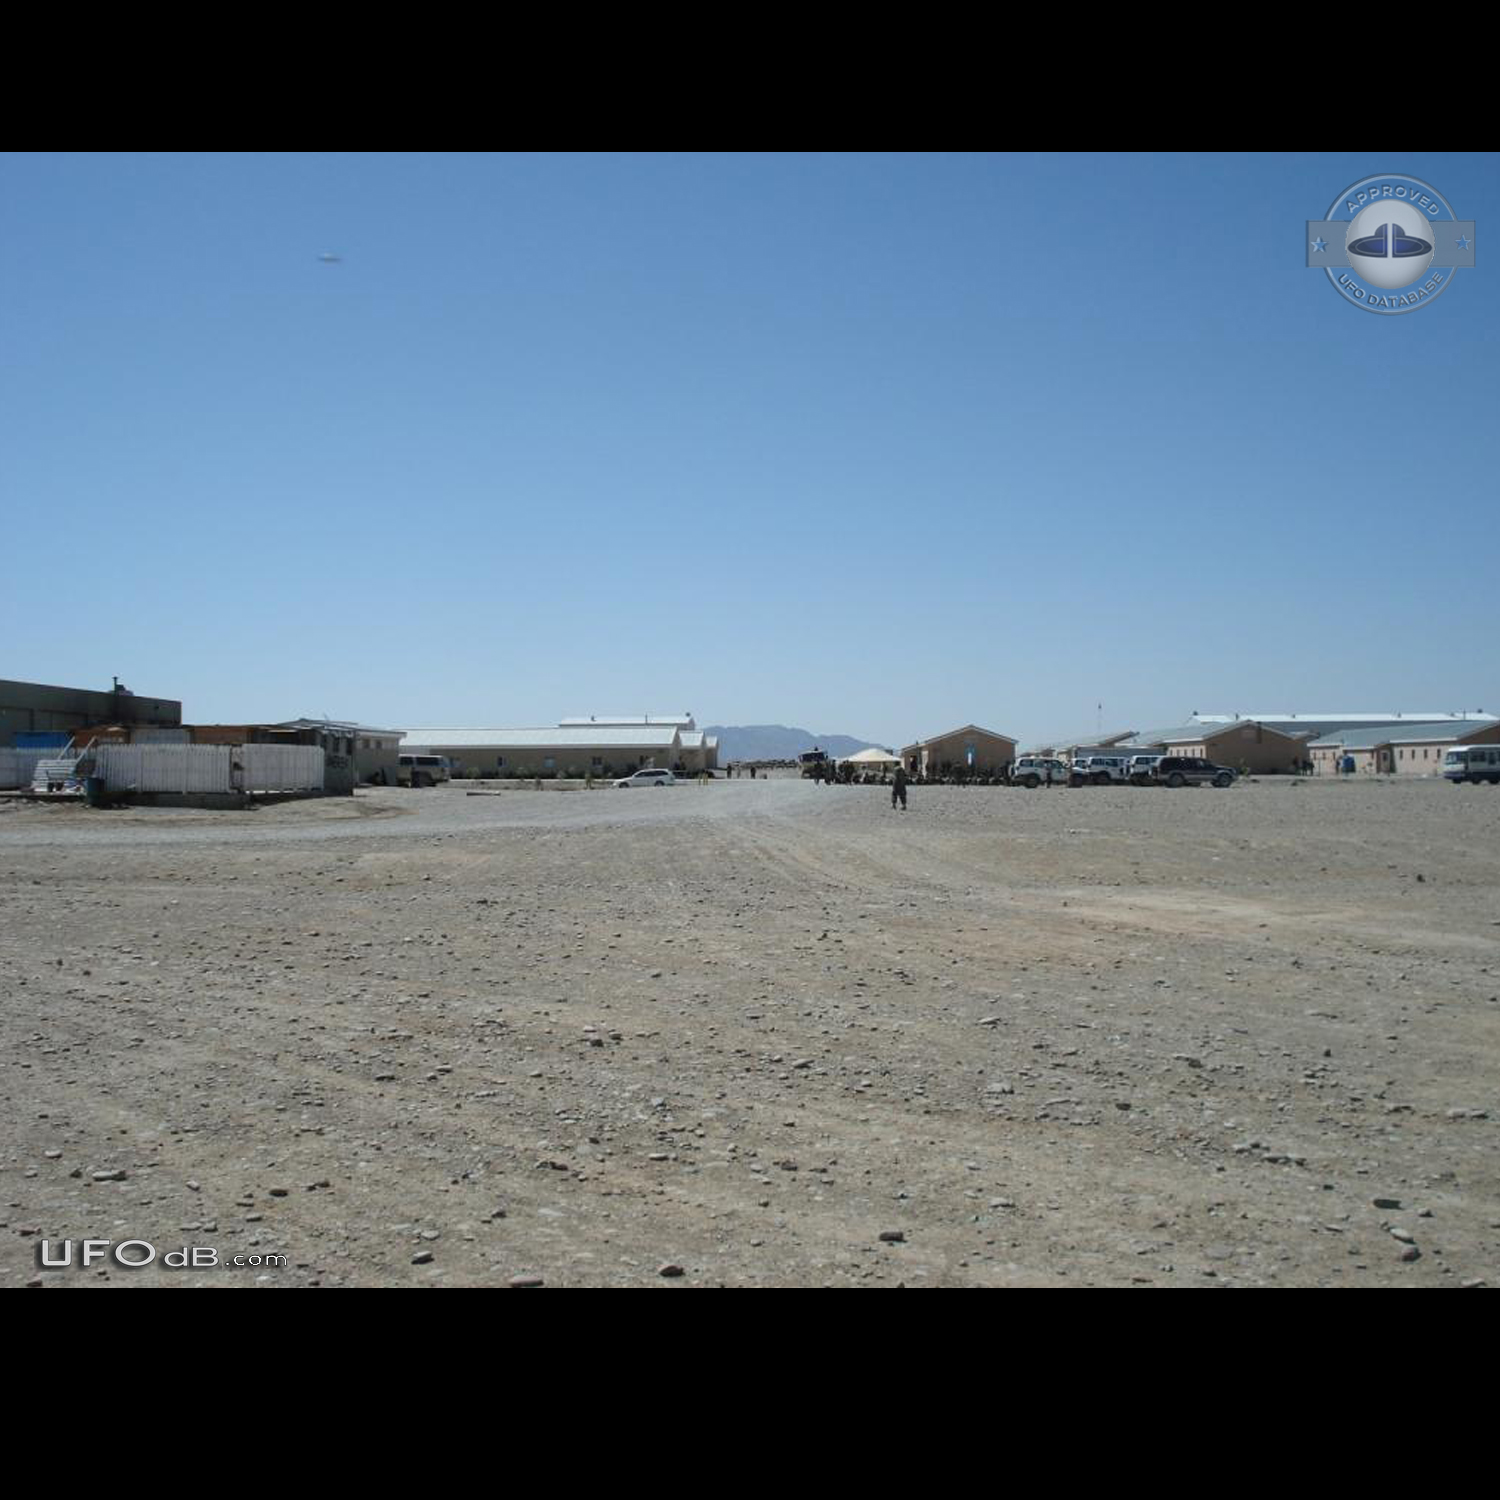 Object captured when taking photo at NATO base site Kandahar Afghanist UFO Picture #748-1